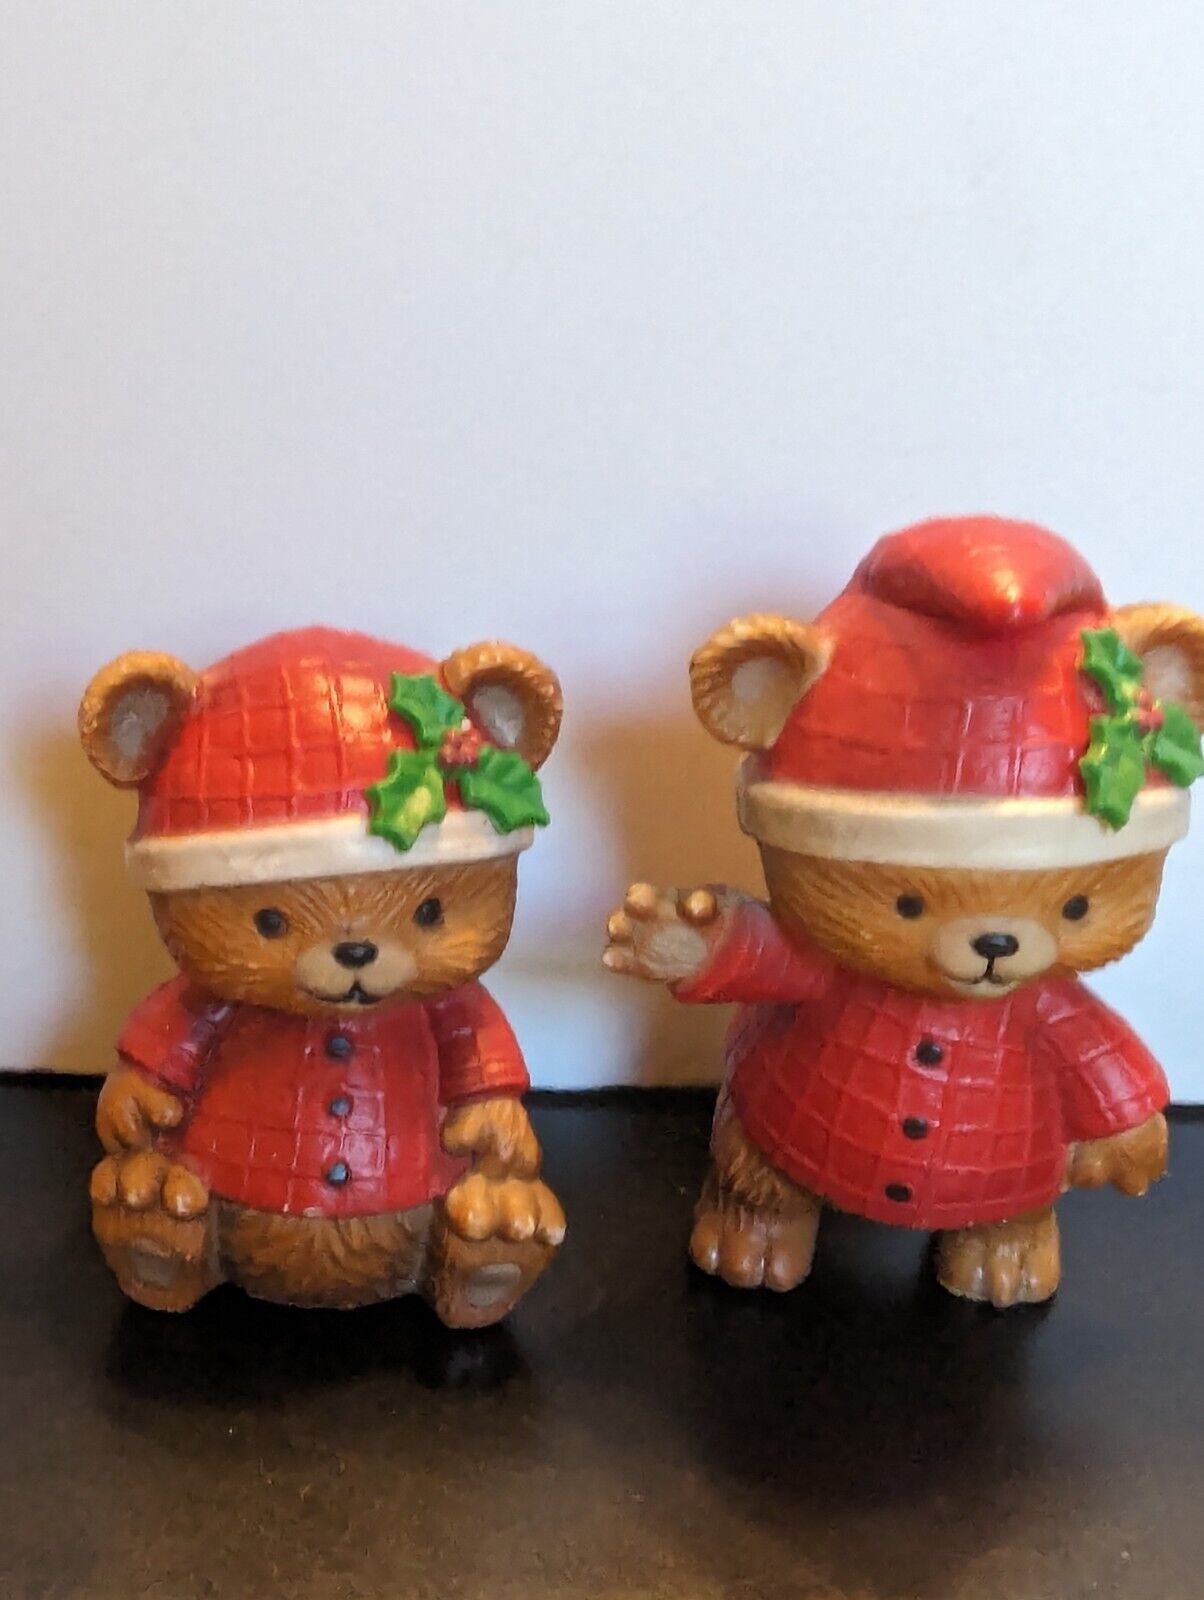 Vintage Plastic Teddy Bears in Red Pajamas and Hats with Holly, Unbranded, Made